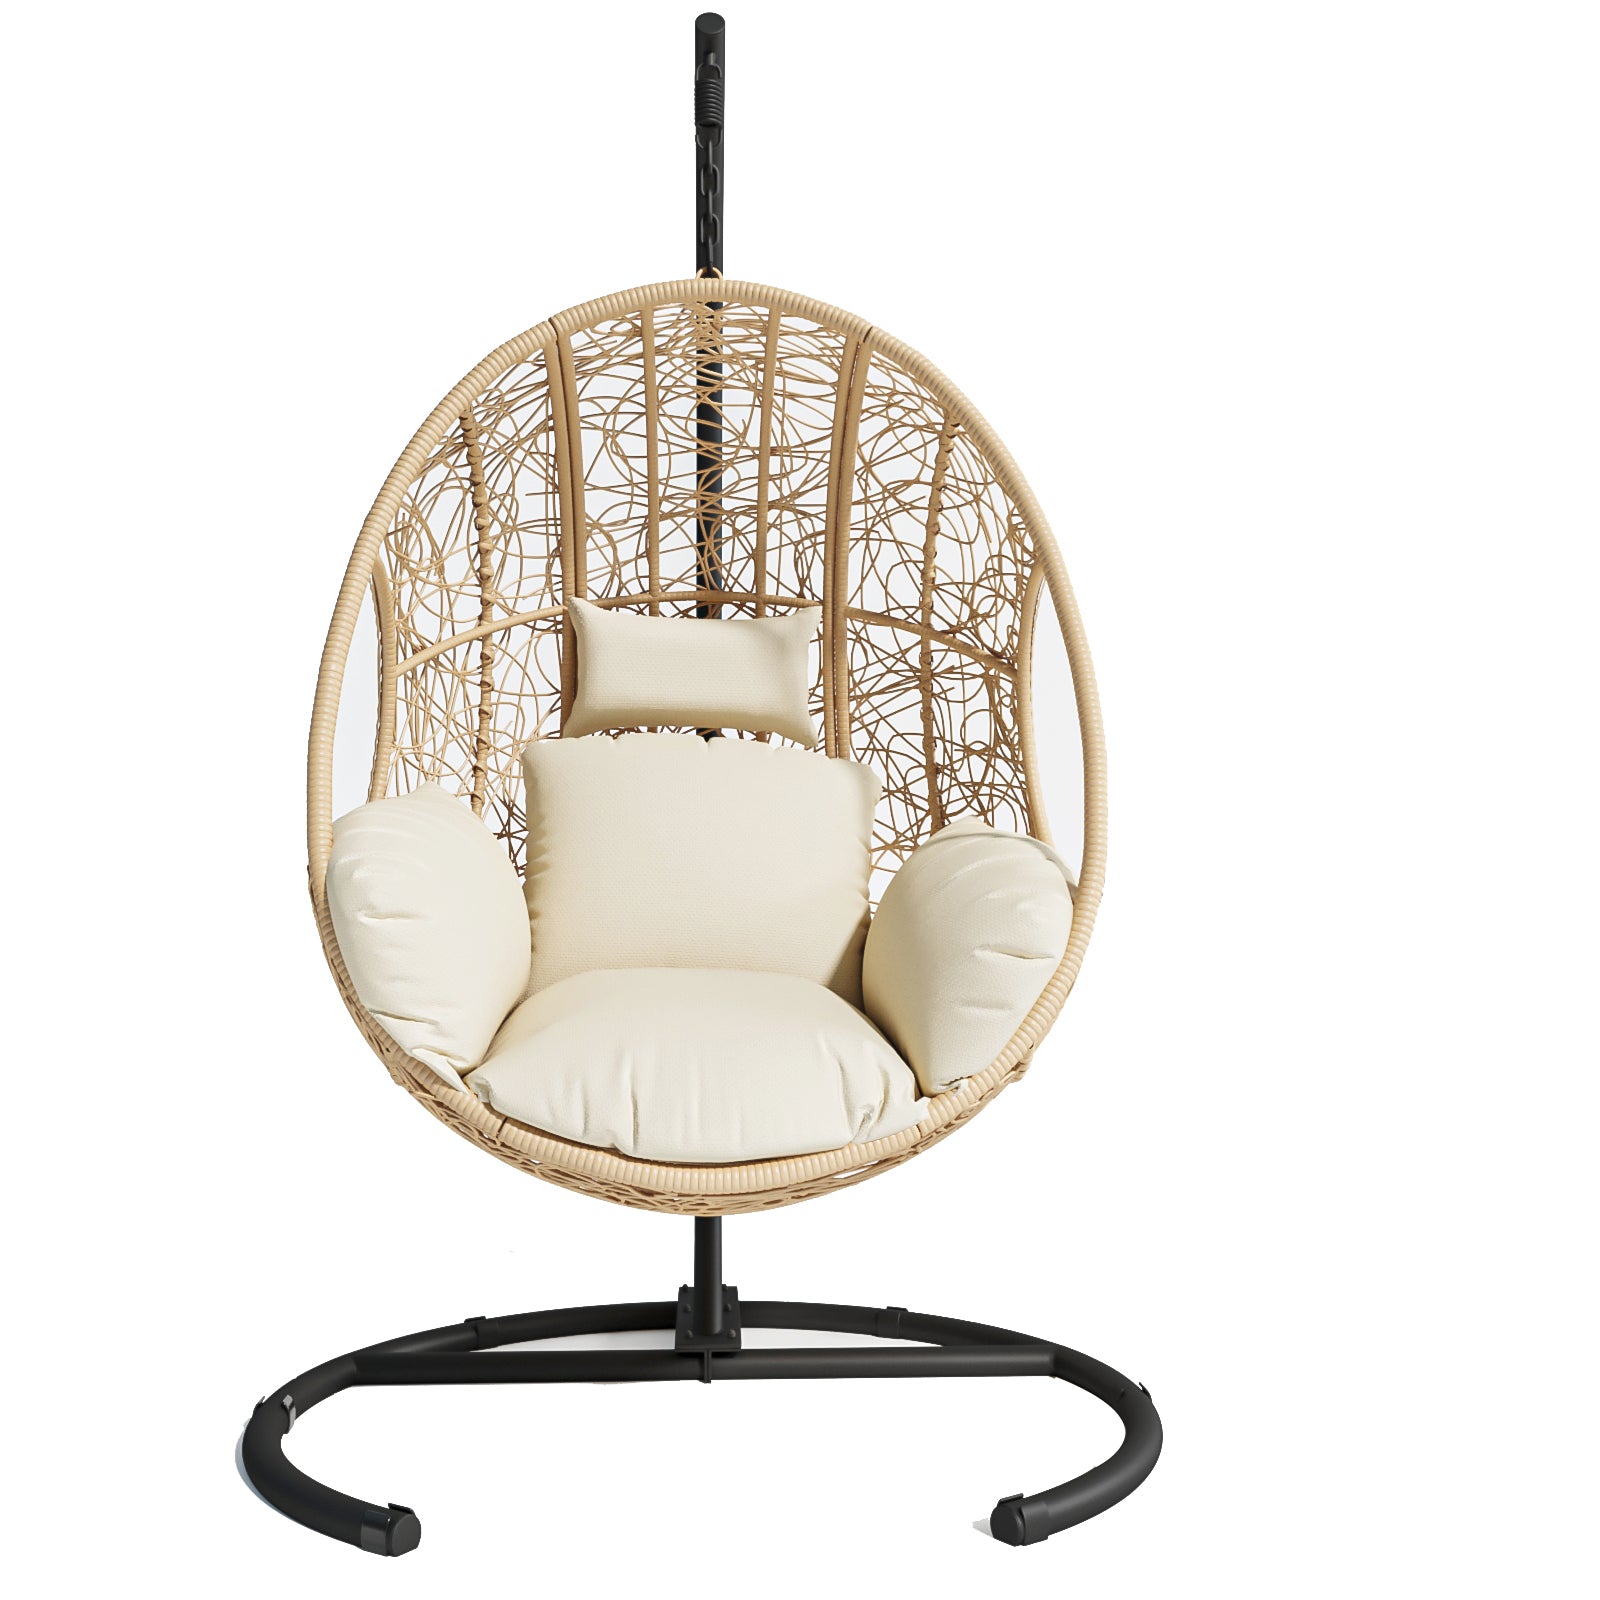 Beebe Wicker Swing Chair With Stand - Natural